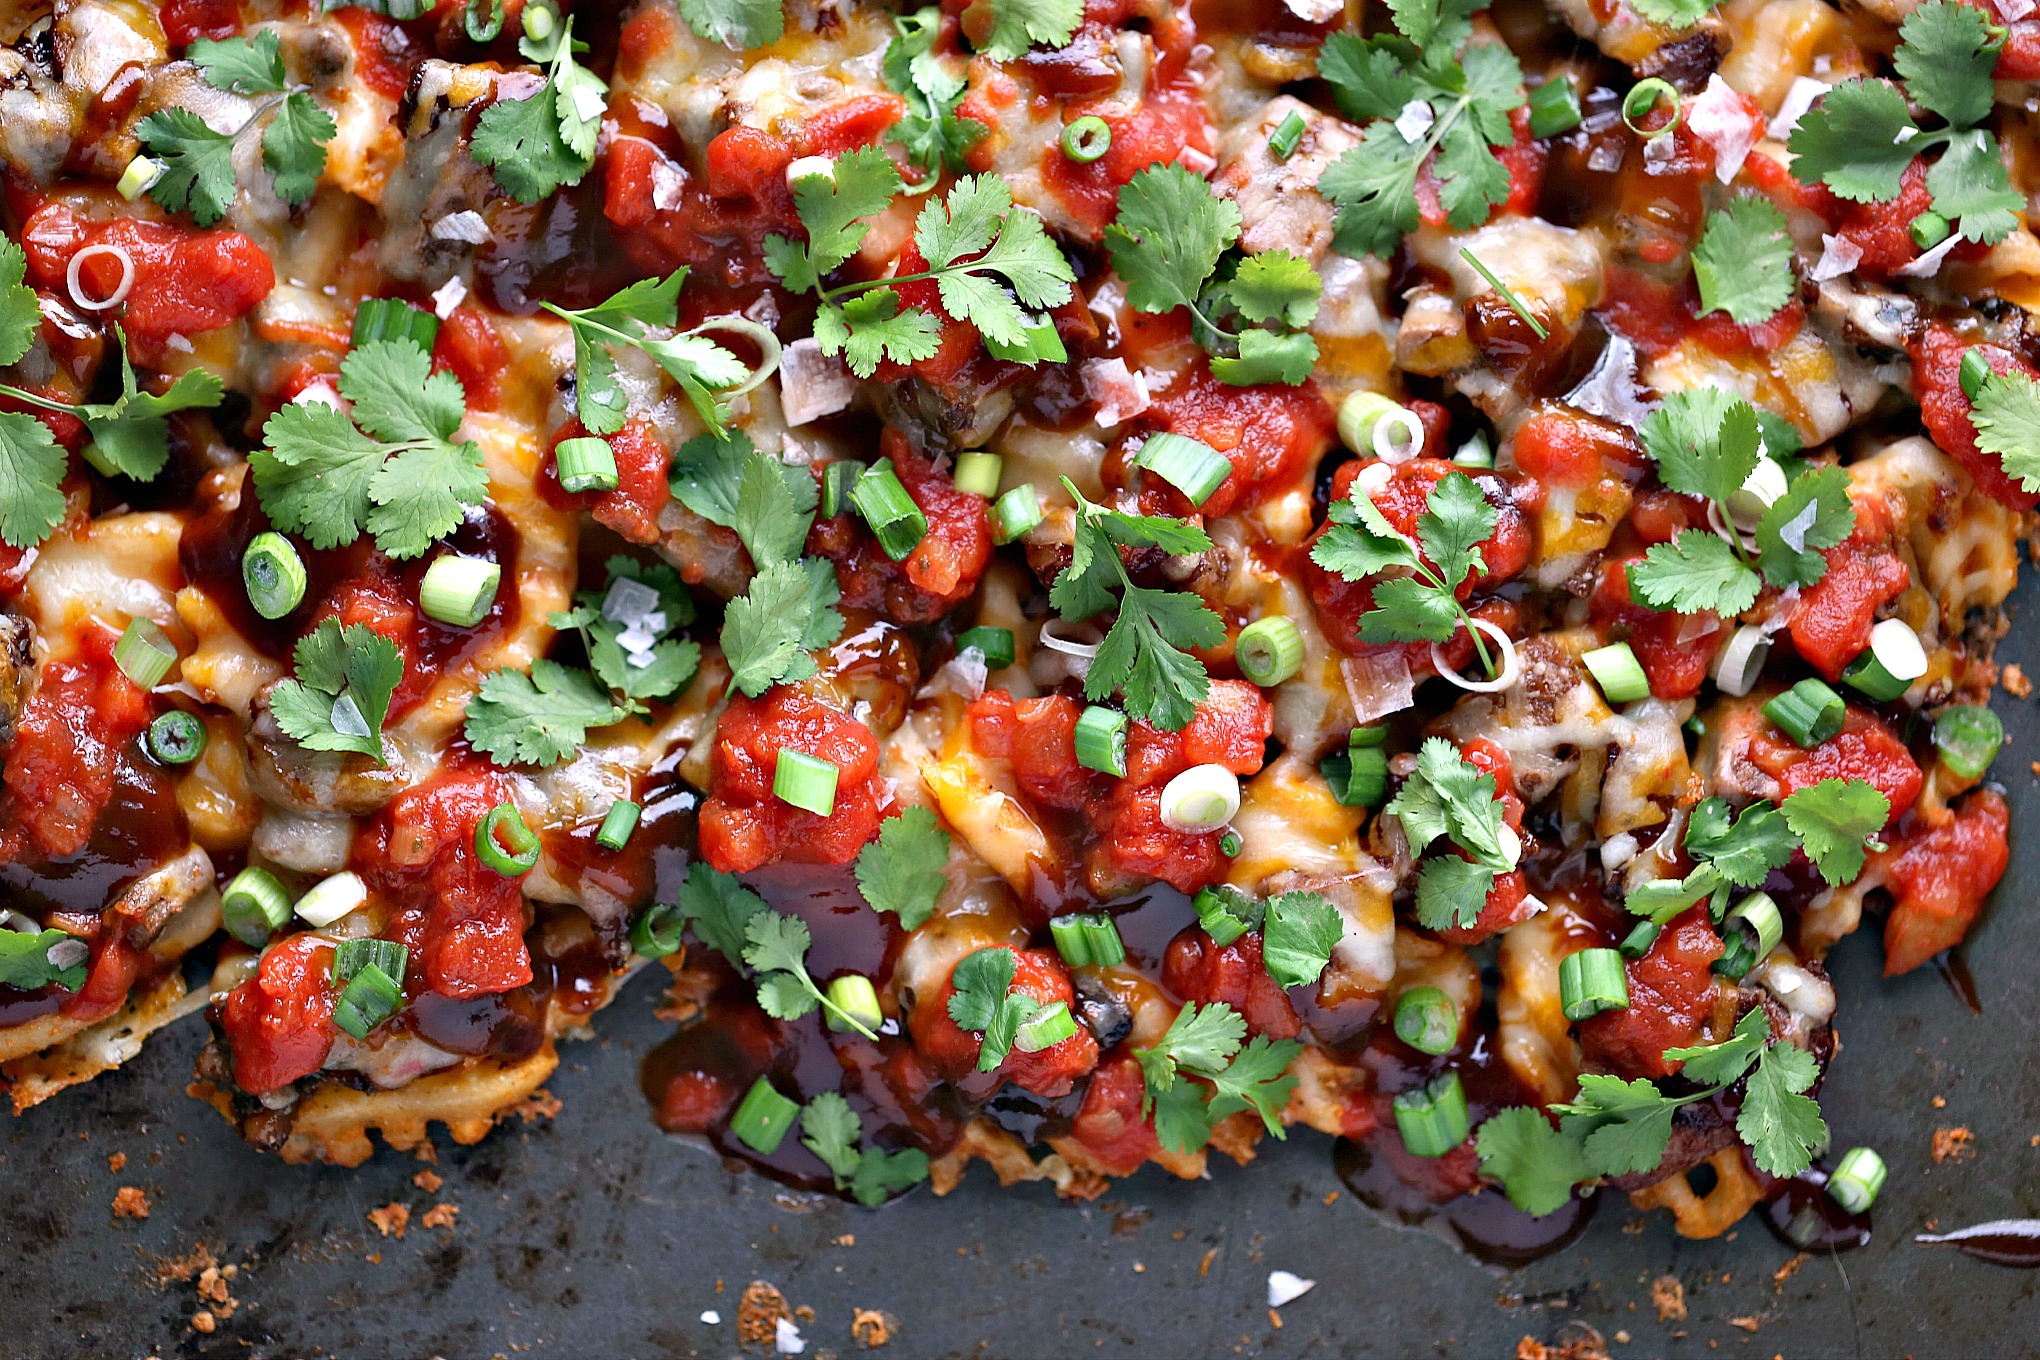 Sheet Pan Steak and Waffle Fry Nachos from cravingsofalunatic.com- These loaded nachos are made with waffle fries, steak and Tex-Mex cheese then topped with barbecue sauce, salsa, onions, and cilantro. All cooked on a sheet pan to make clean up a snap. 